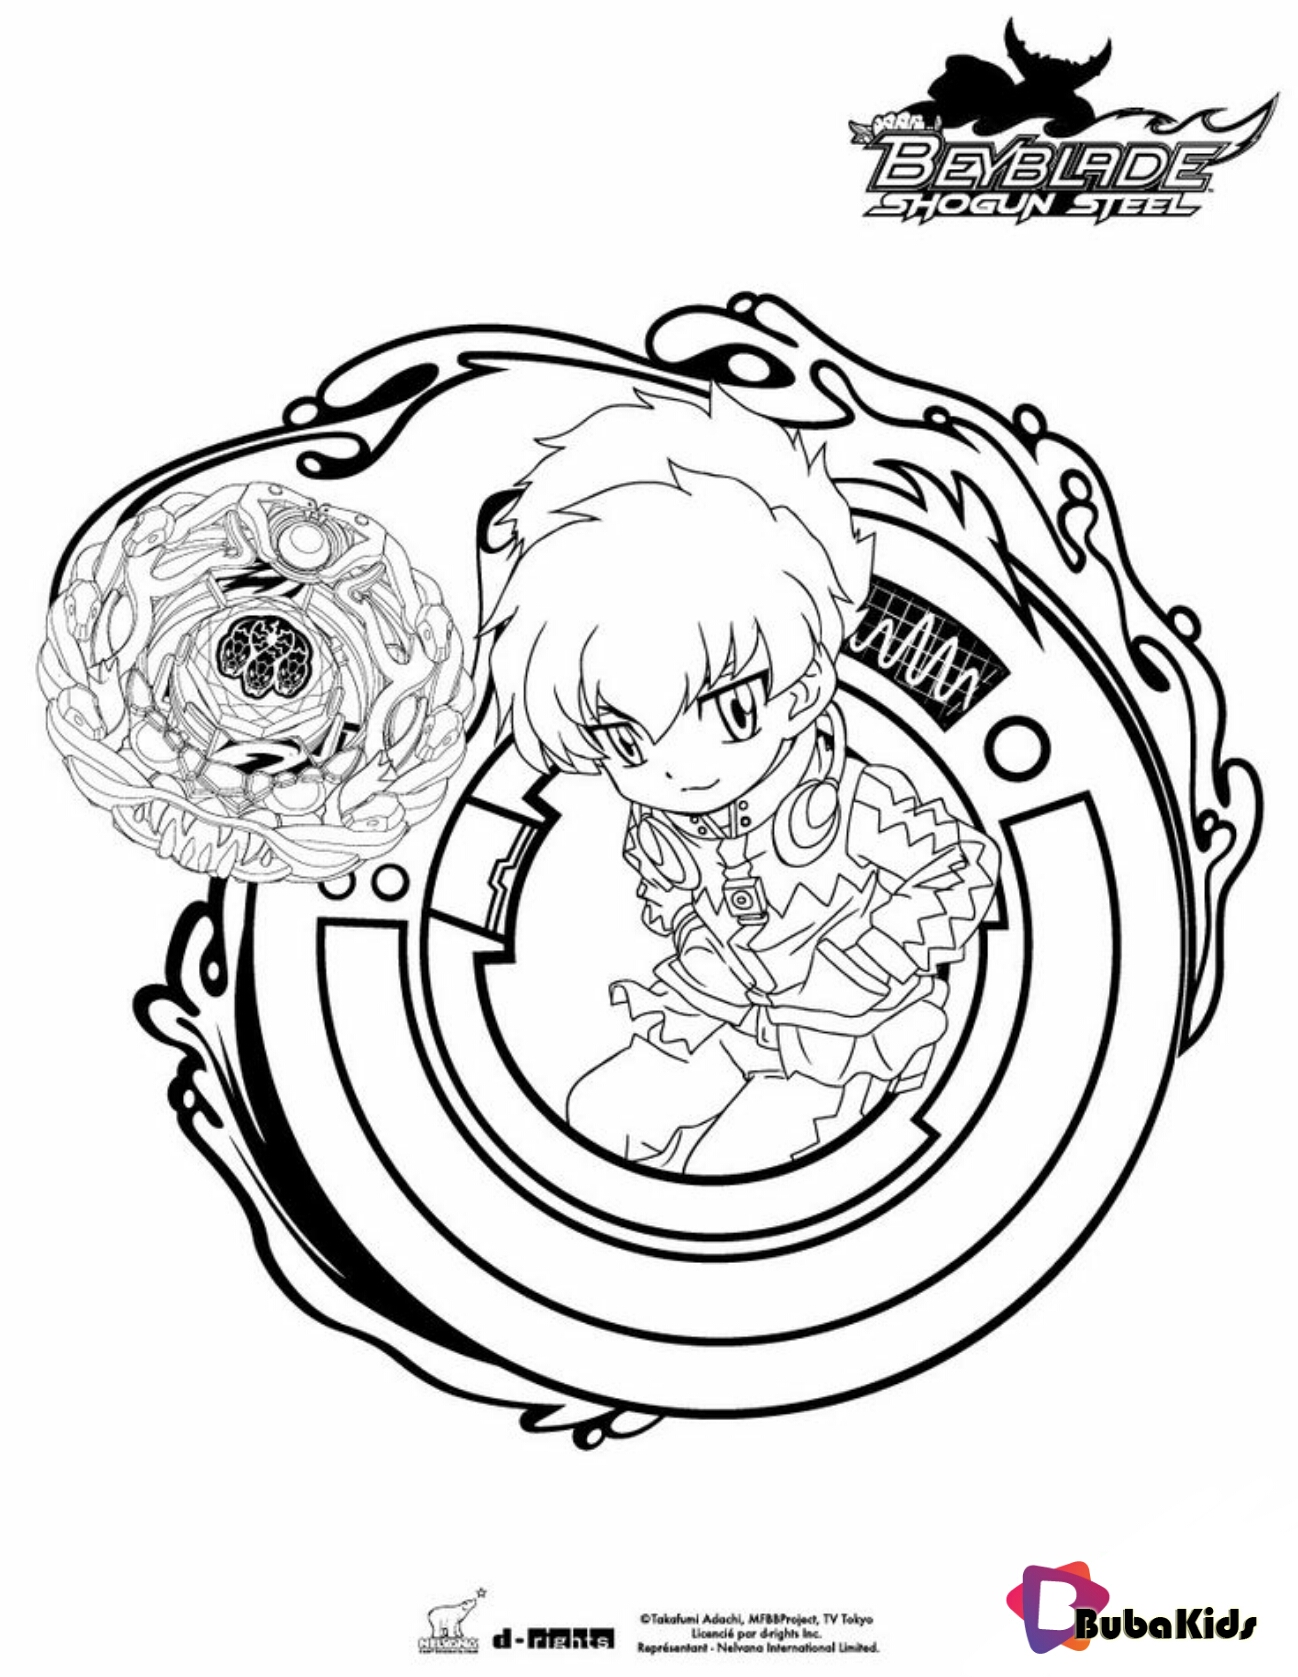 Eight coloring page, More Beyblade coloring sheets on bubakids.com